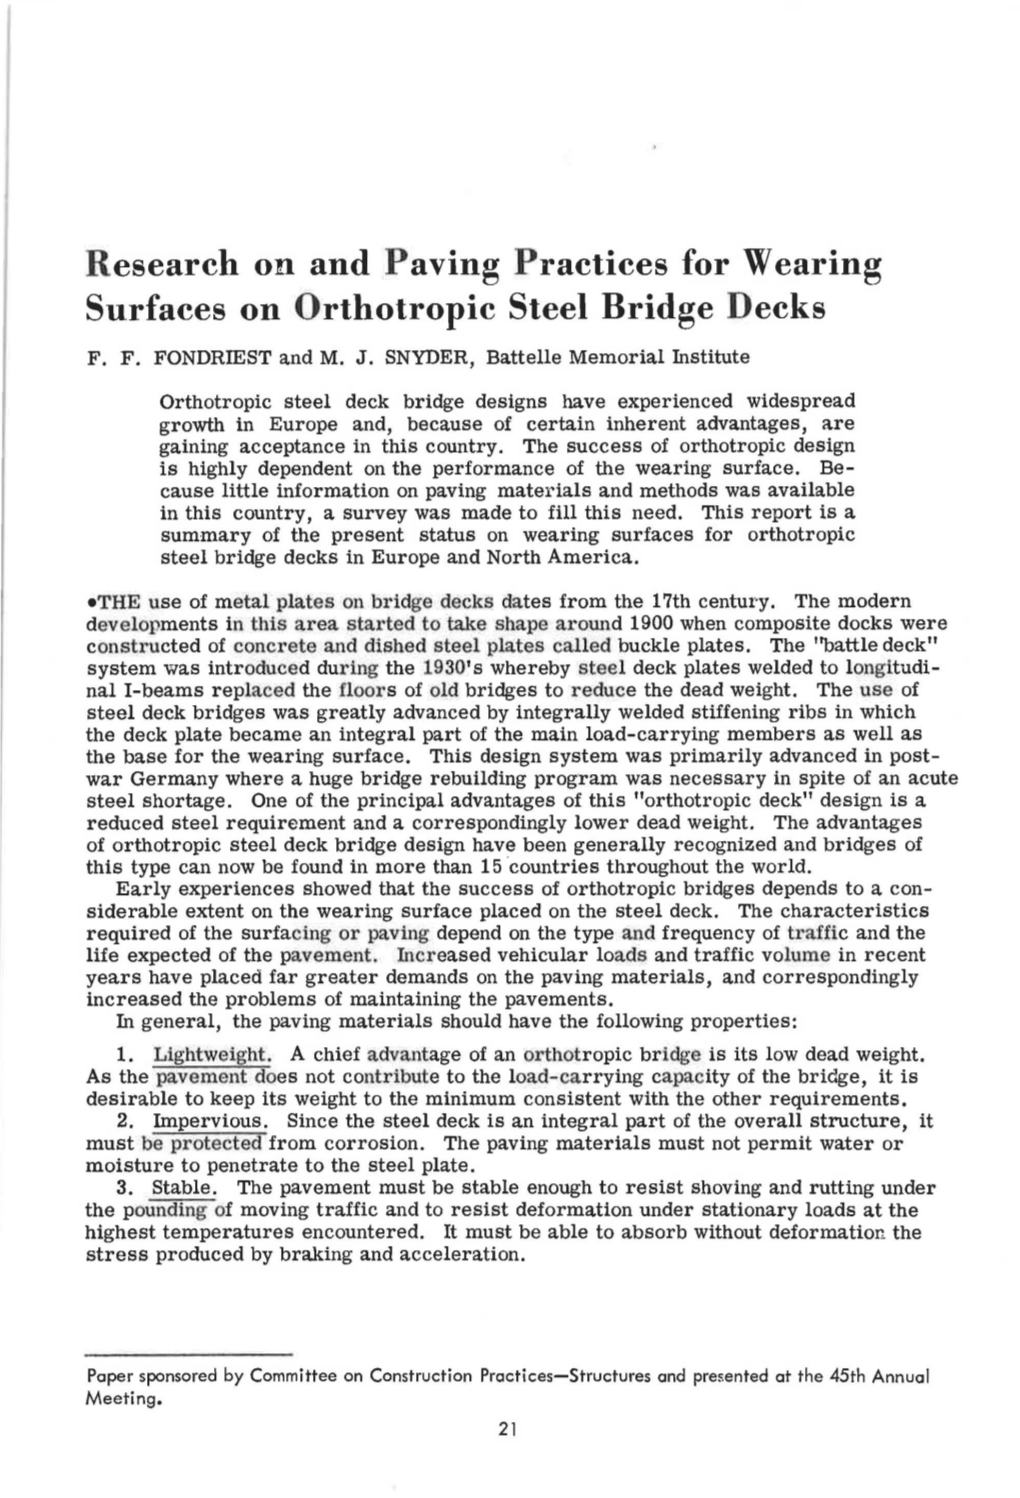 Research on and Paving Practices for Wearing Surfaces on Orthotropic Steel Bridge Decks